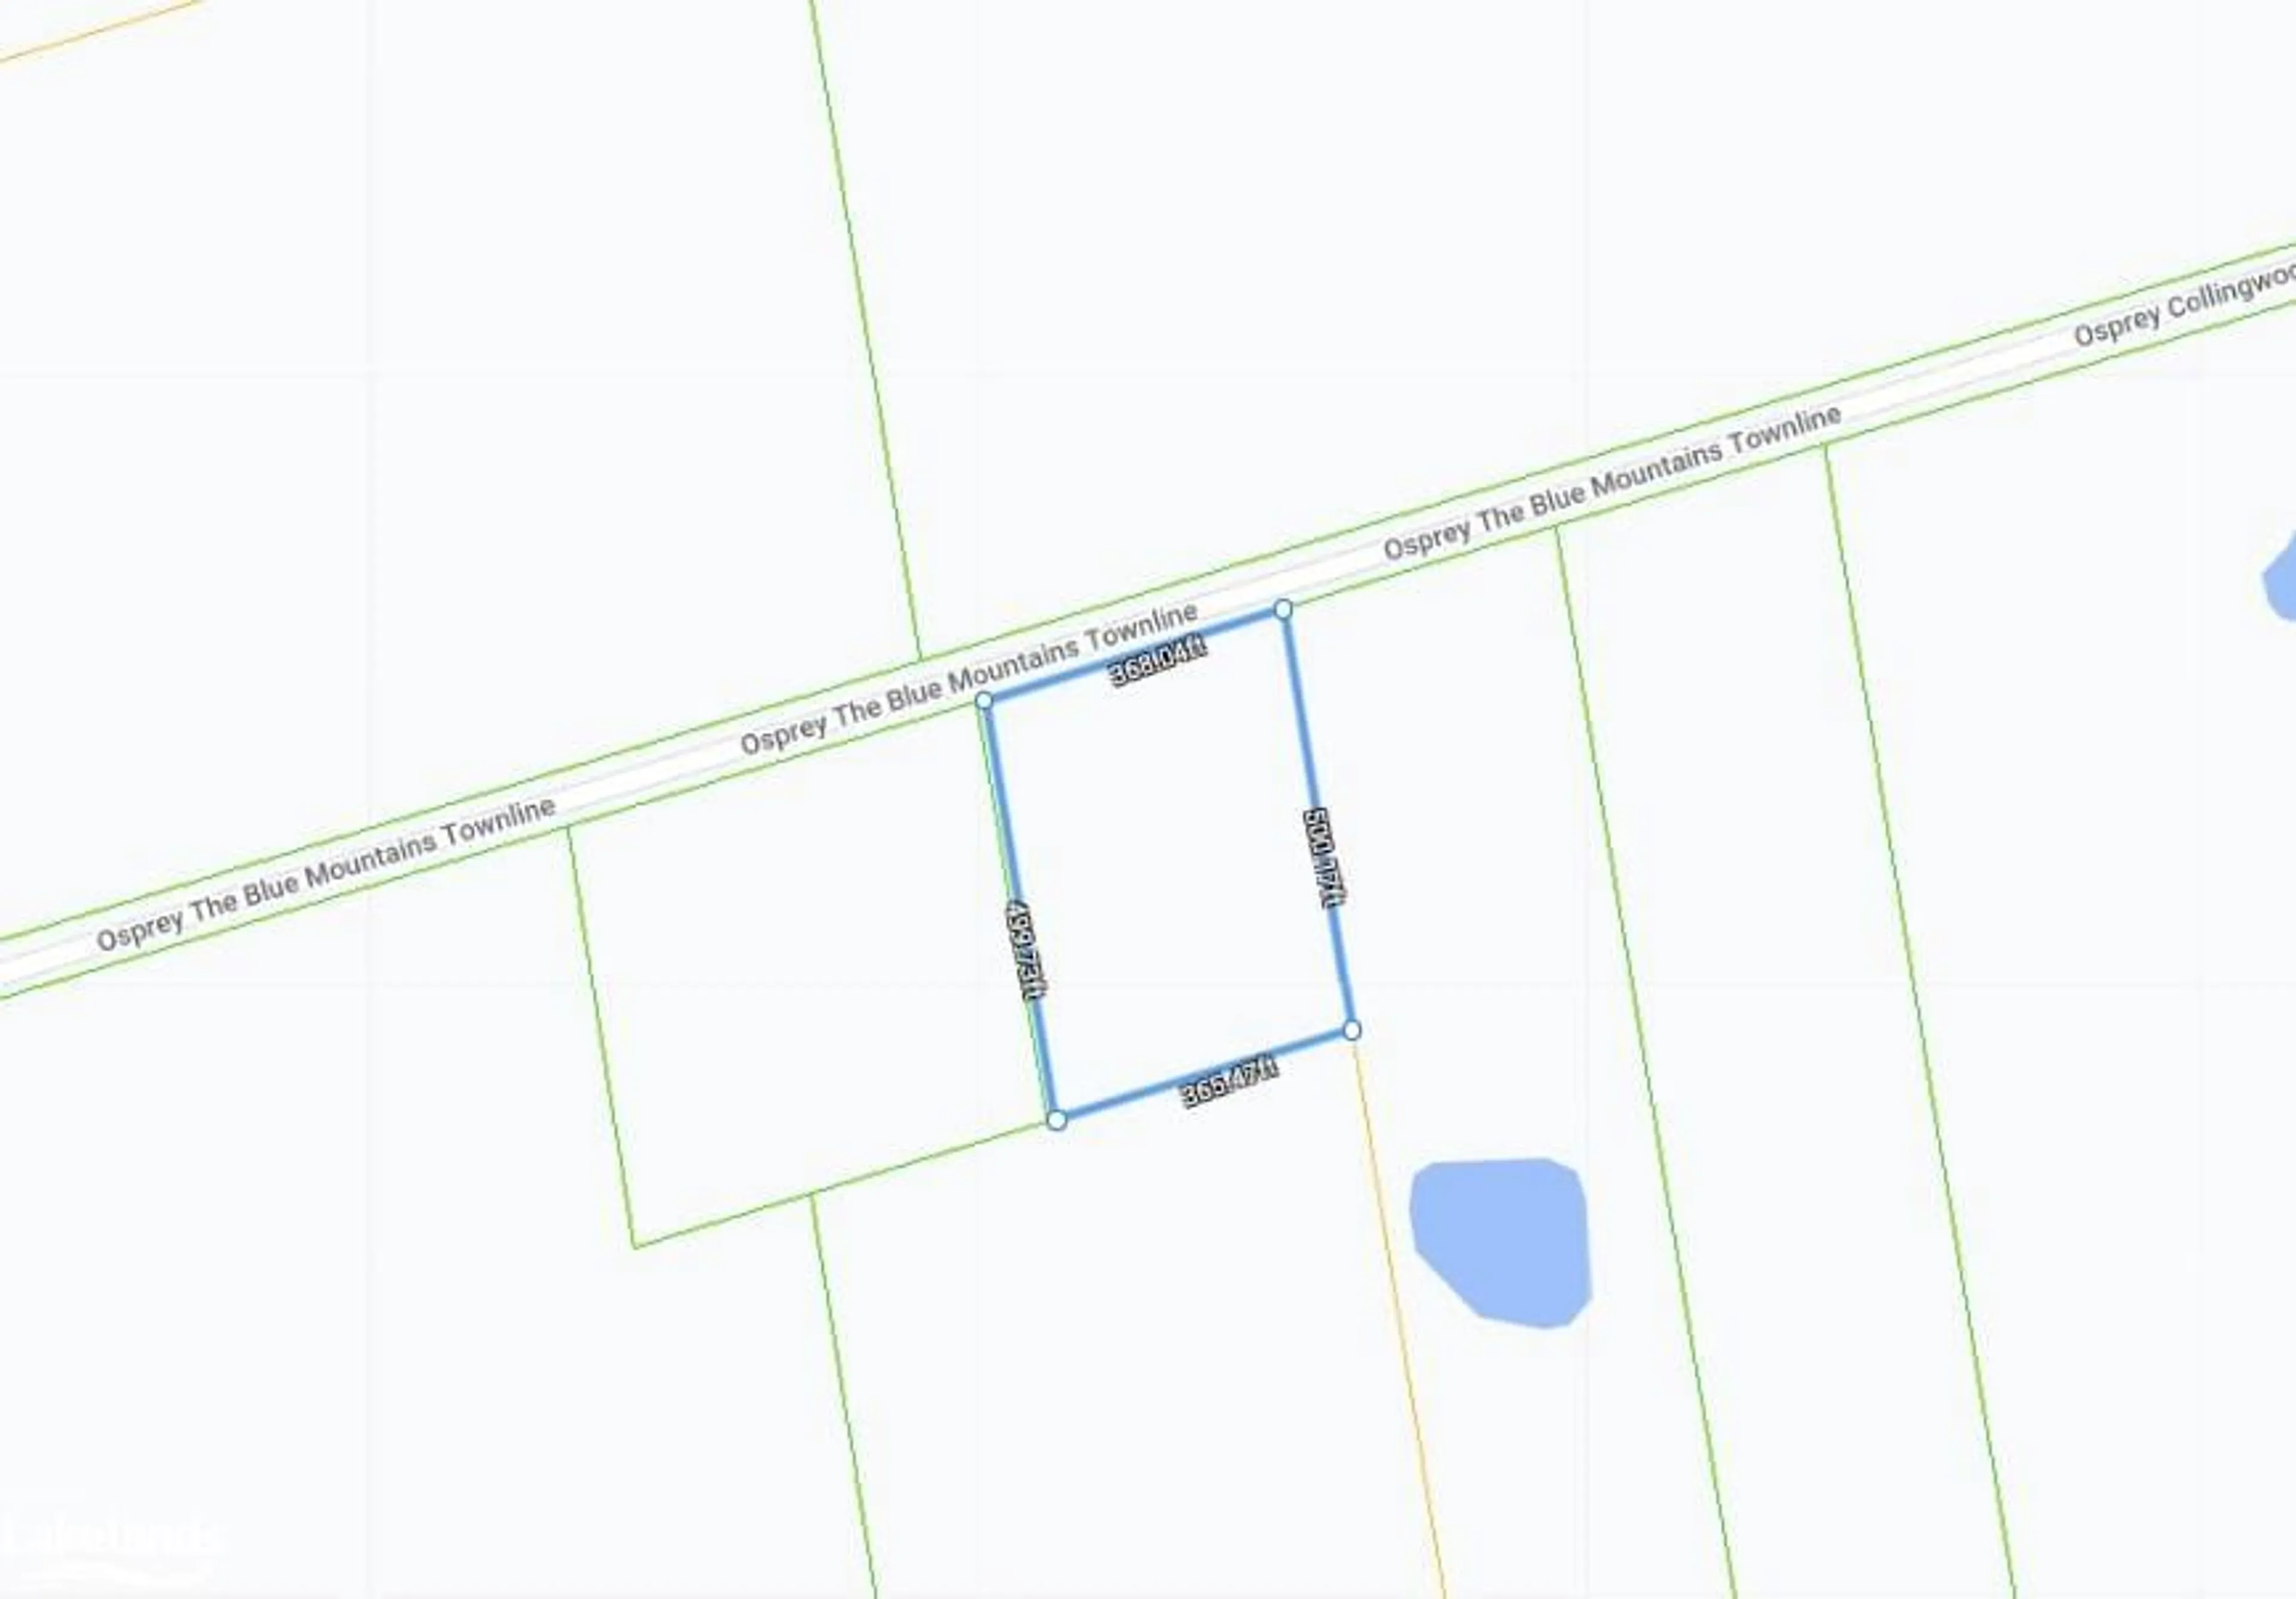 Floor plan for PART LOT 9 CONC Osprey The Blue Mountains Tline, Grey Highlands Ontario N0H 2E0